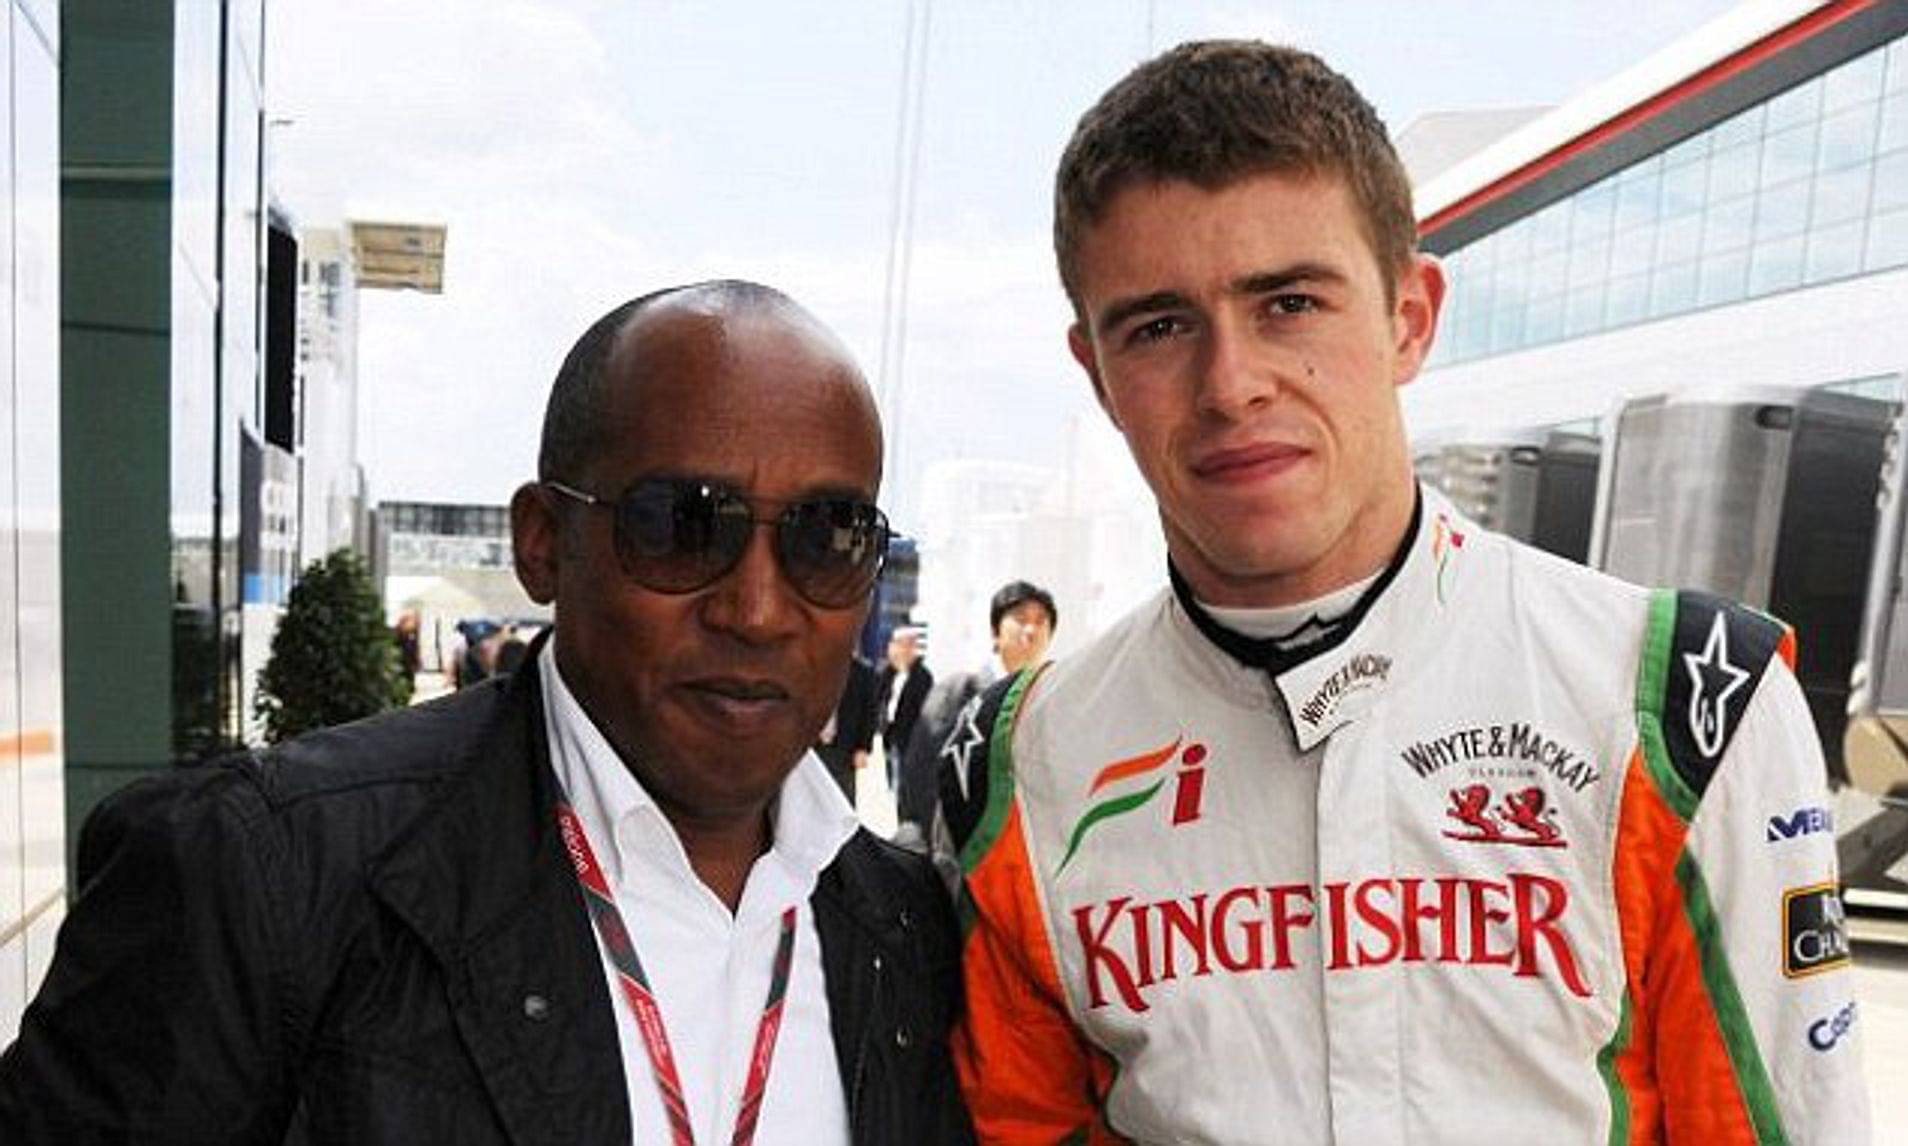 When Lewis Hamilton's father Anthony sued former Aston Martin driver over a $5.5 Million energy drink sponsorship deal